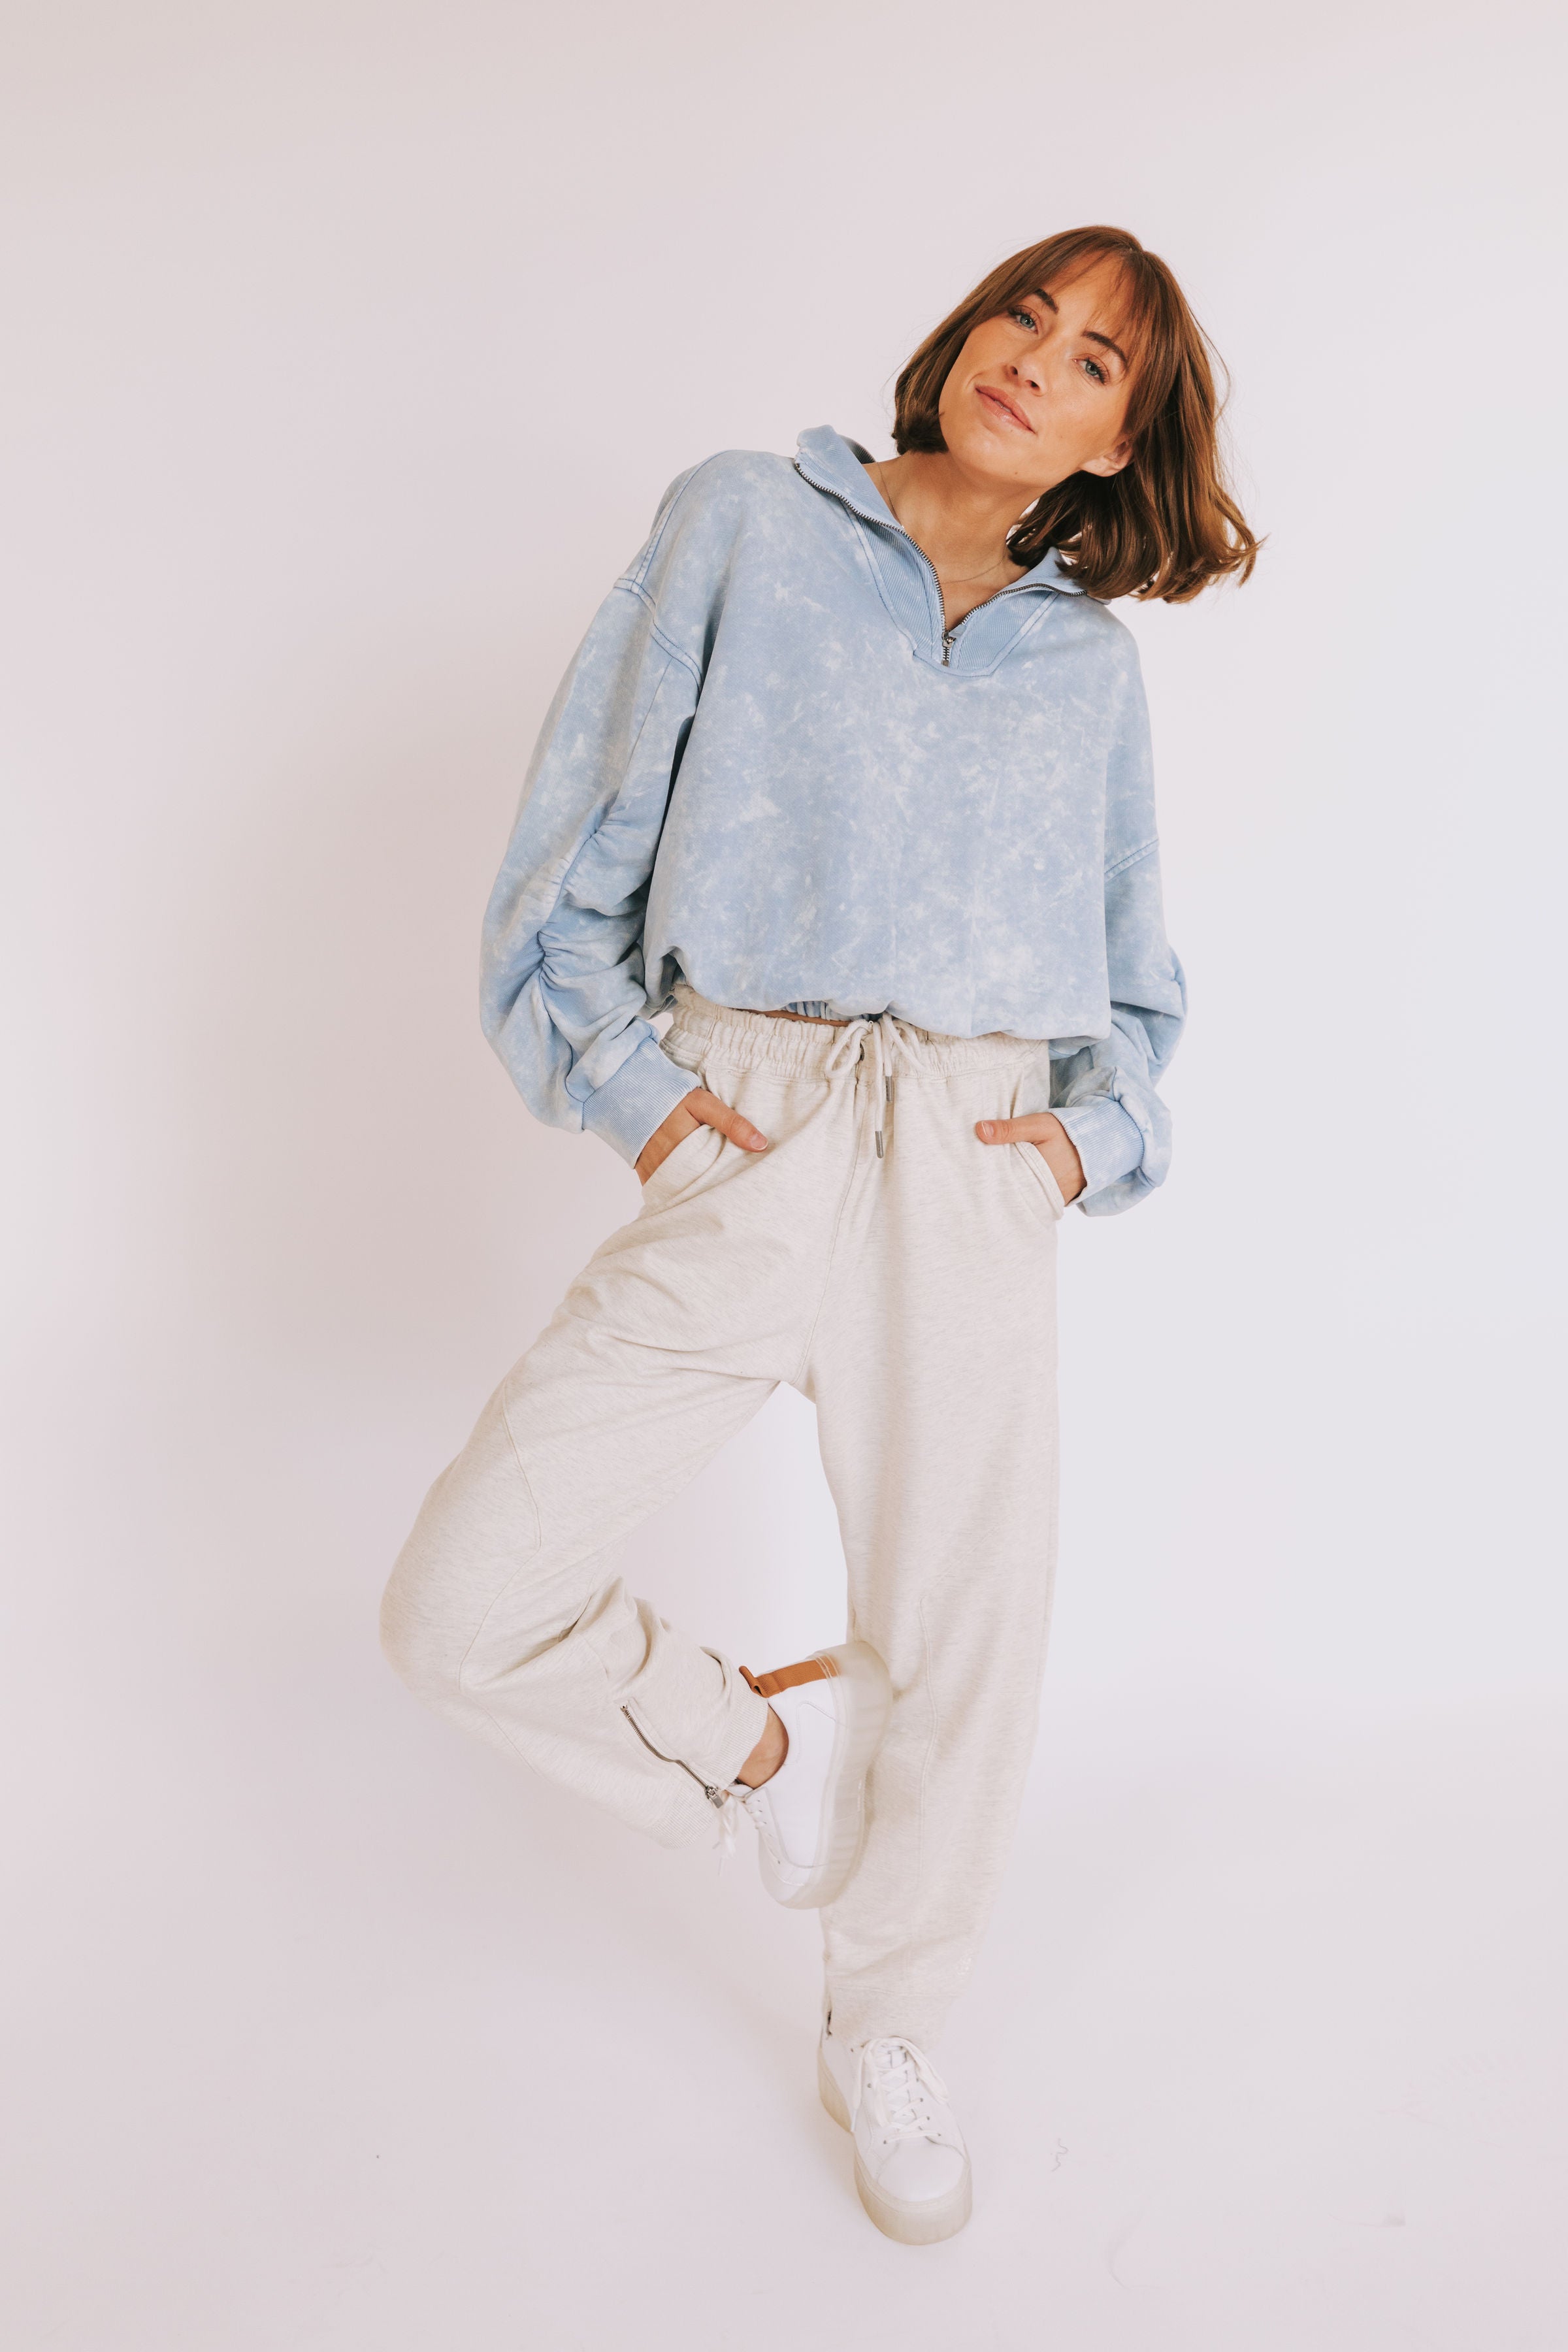 FREE PEOPLE - Nothing But Sweats Pant